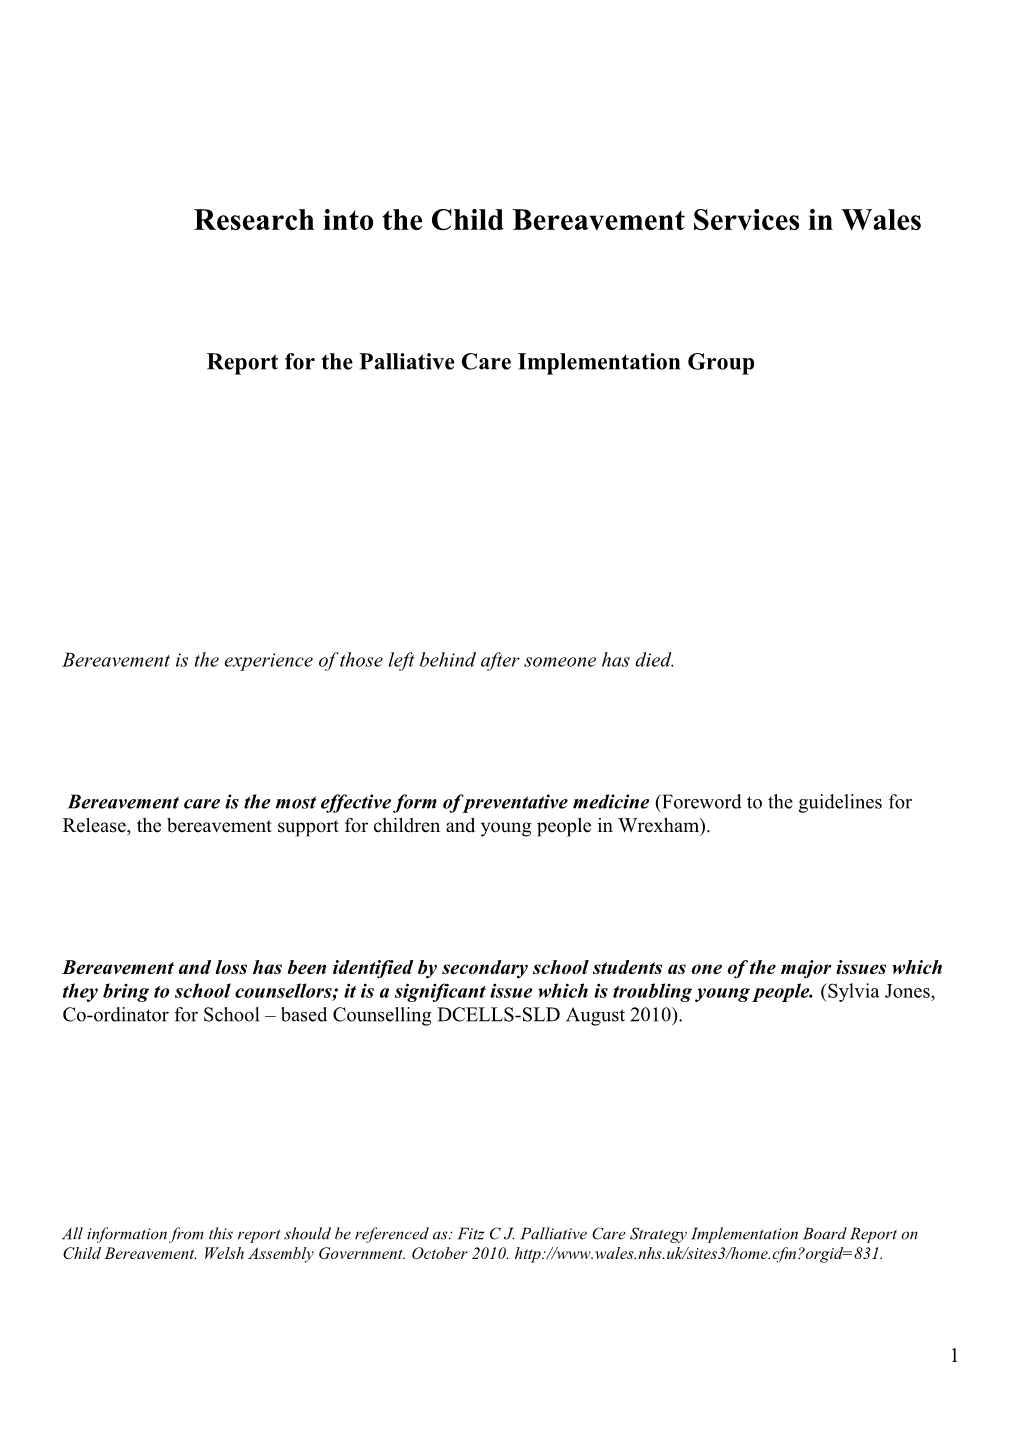 Research Into the Child Bereavement Services in Wales